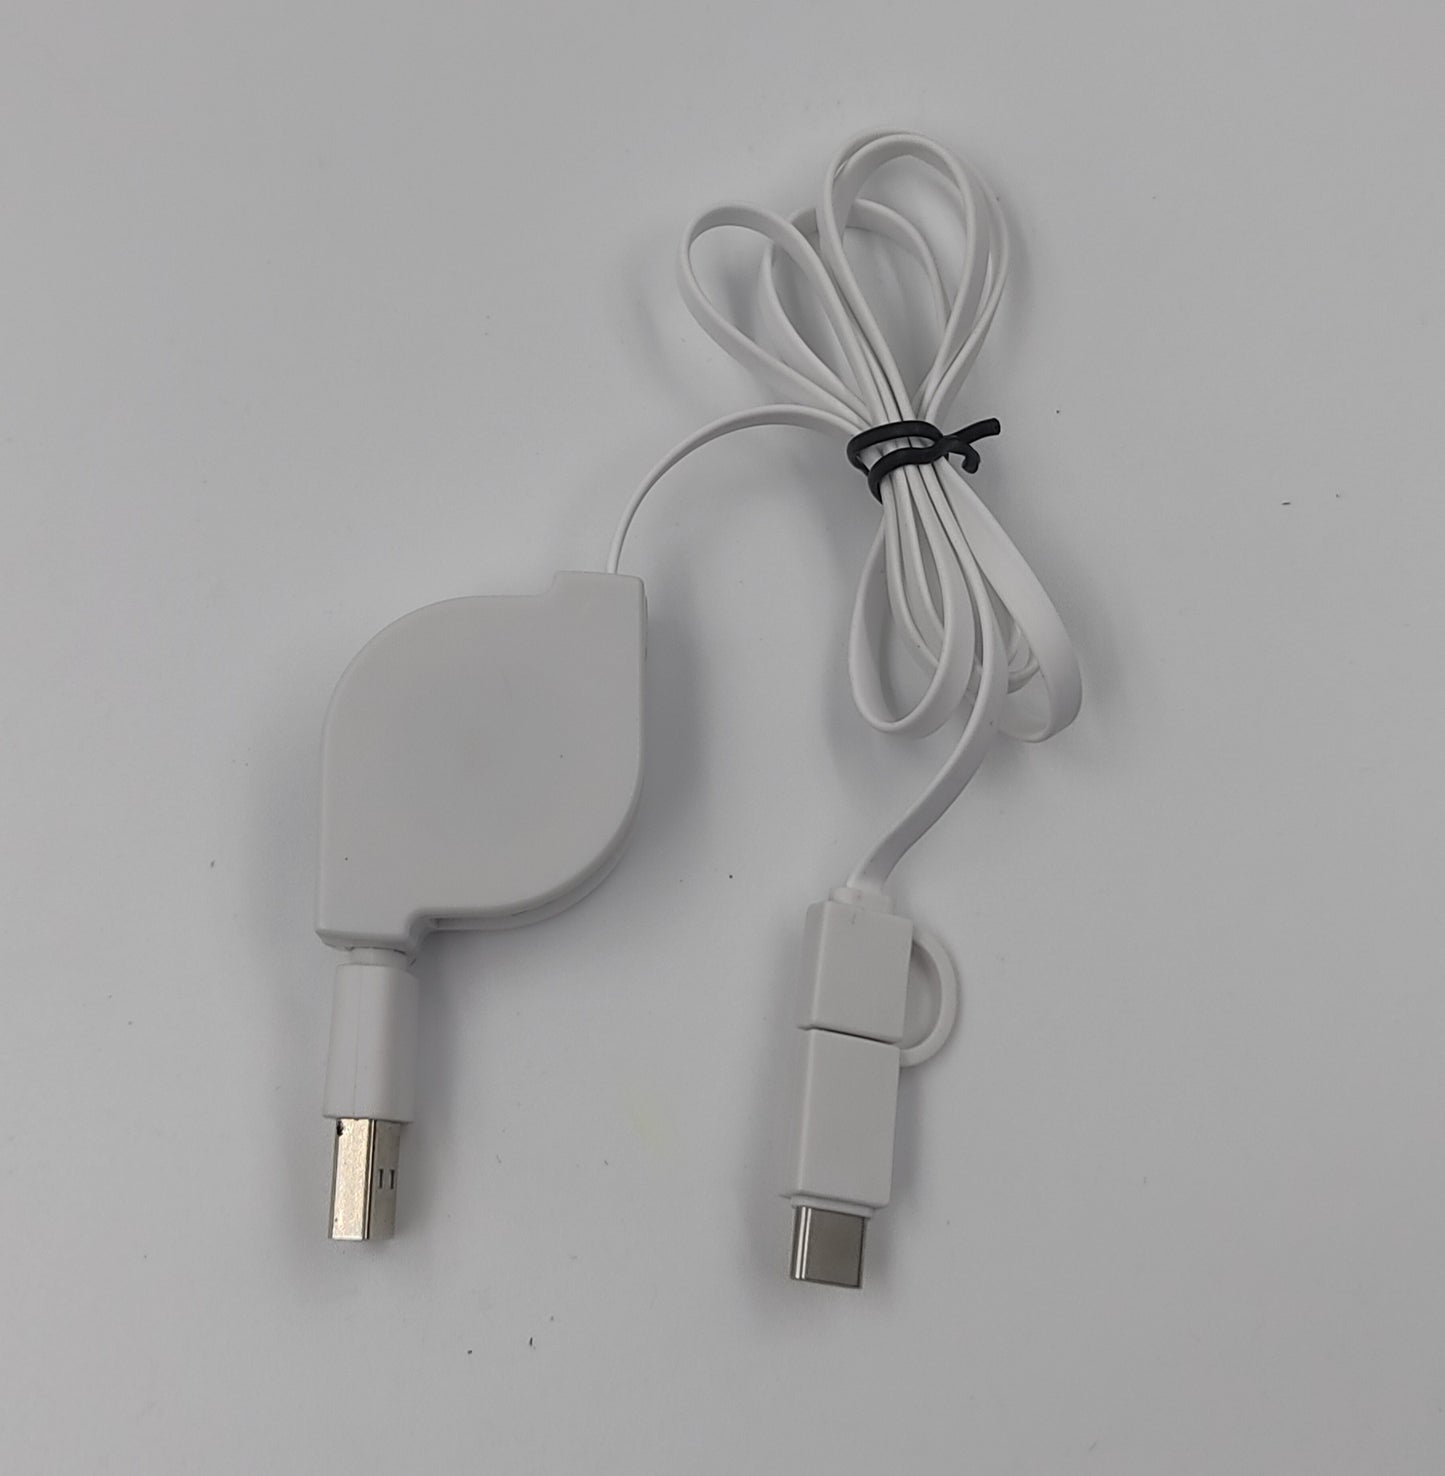 Yo yo 3 in 1 Data & Charging cable (with USB C type port)